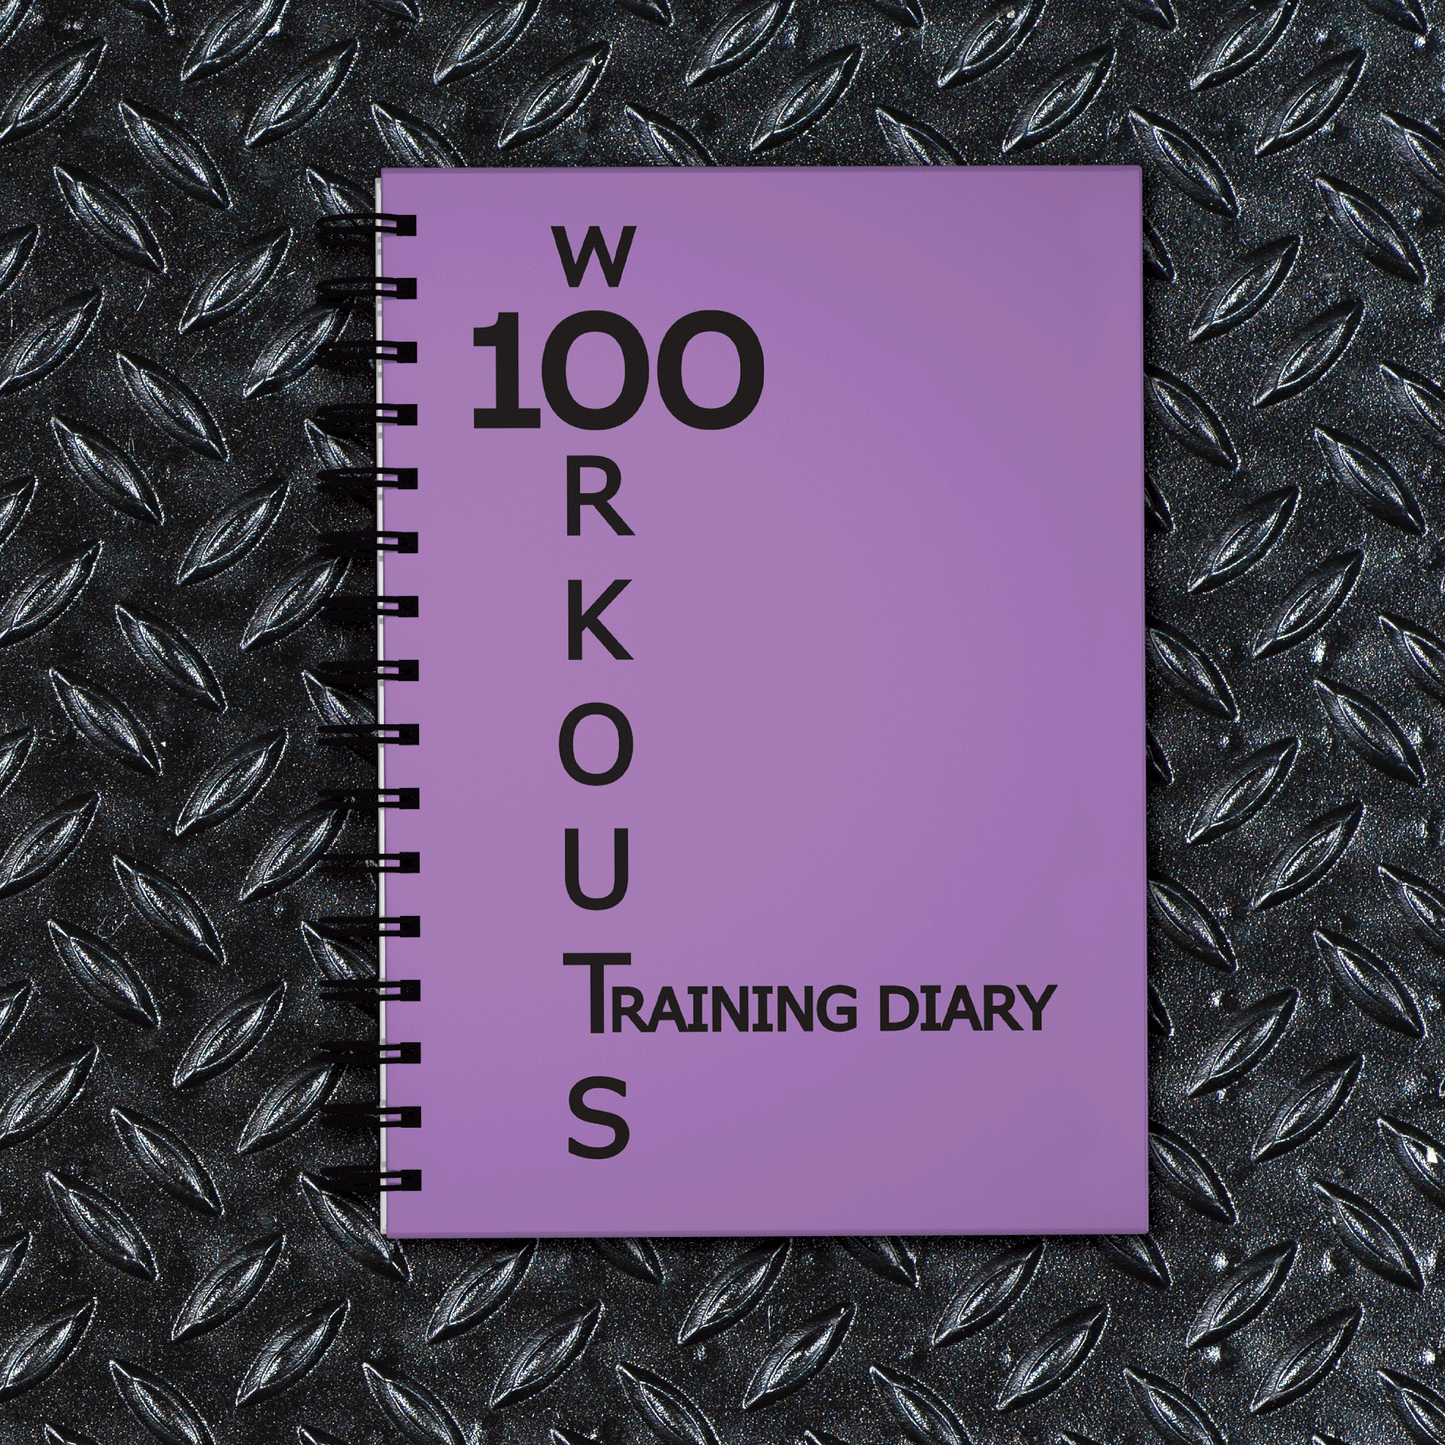 100 WORKOUTS TRAINING DIARY